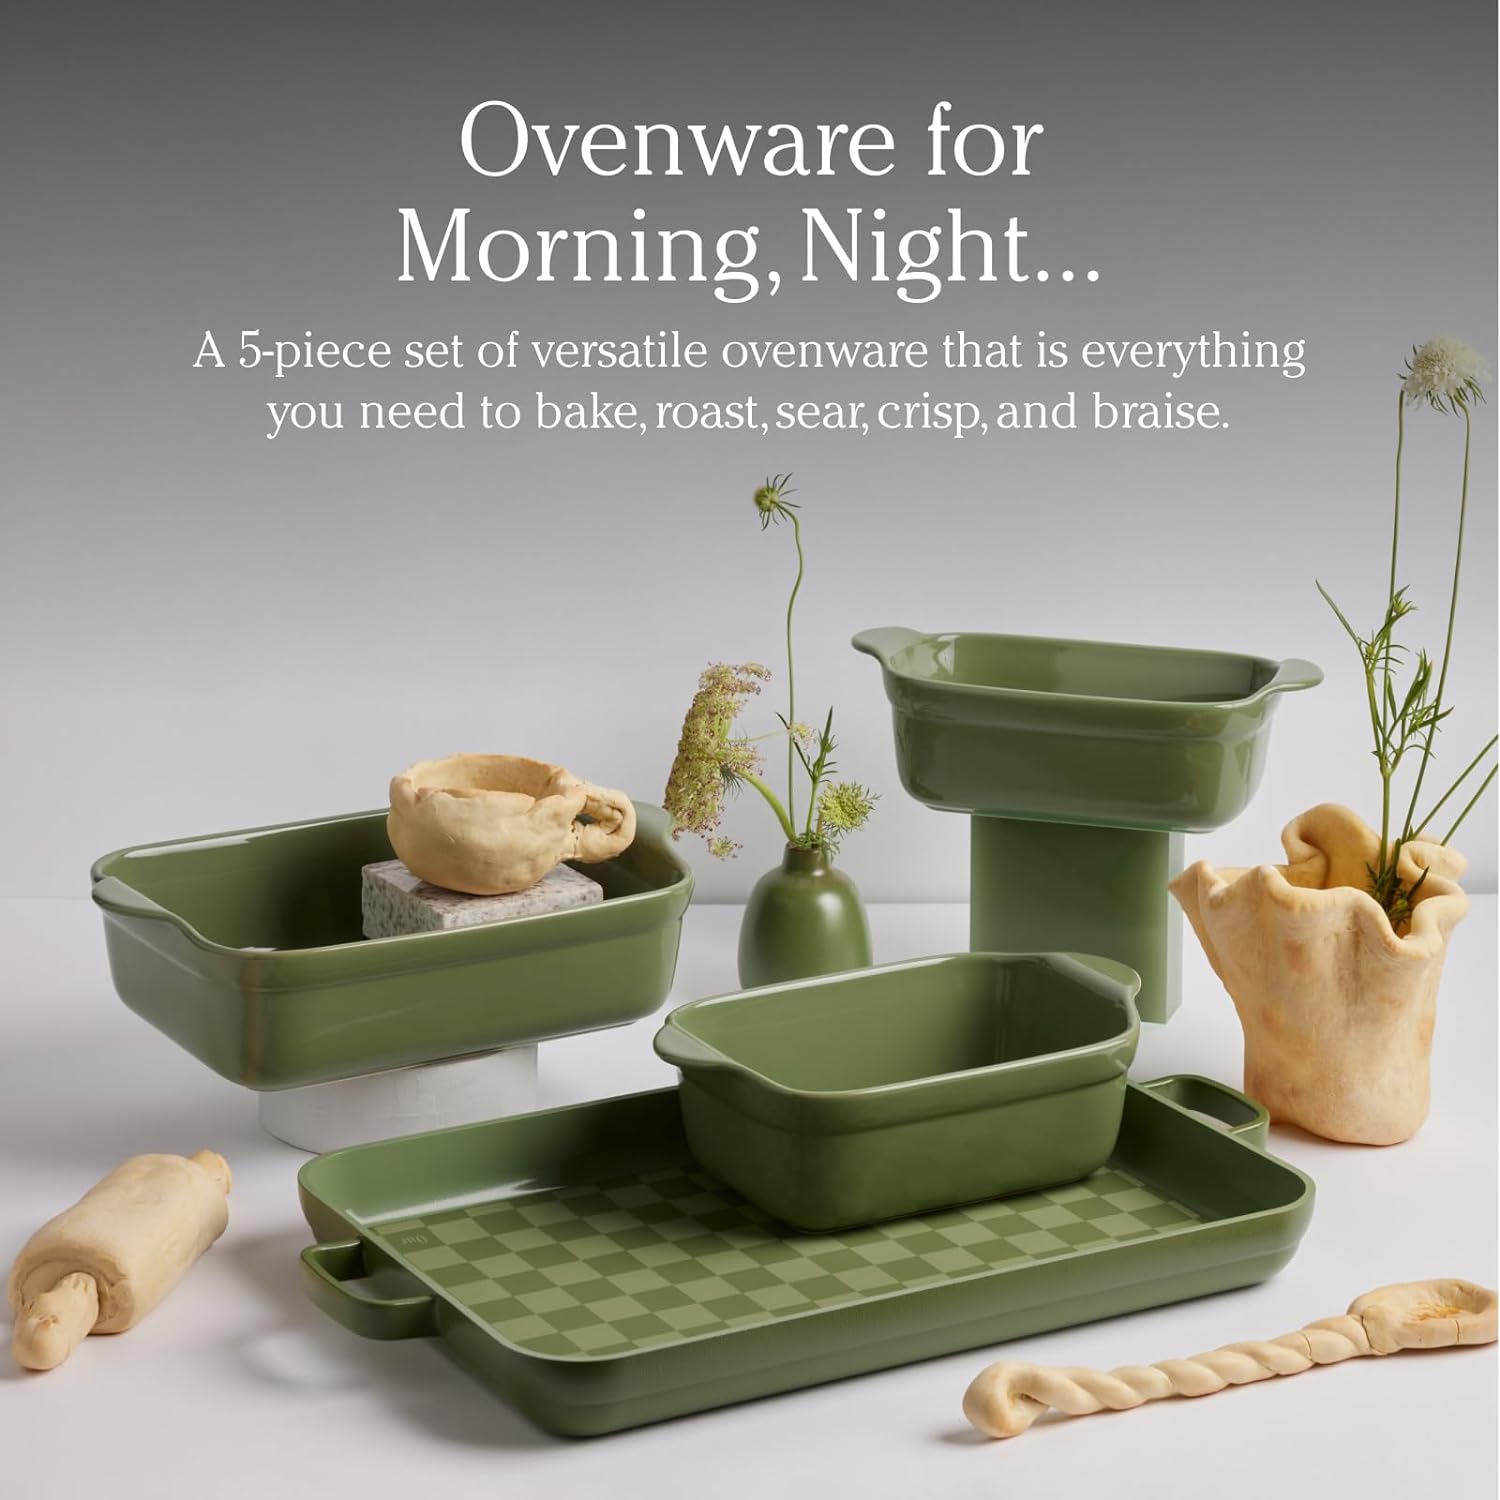 Our Place Ovenware Set | 5-Piece Nonstick, Toxin-Free, Ceramic, Stoneware Set with Oven Pan, Bakers,  Oven Mat | Space-Saving Nesting Design | Oven-Safe | Bake, Roast, Griddle and more | Steam